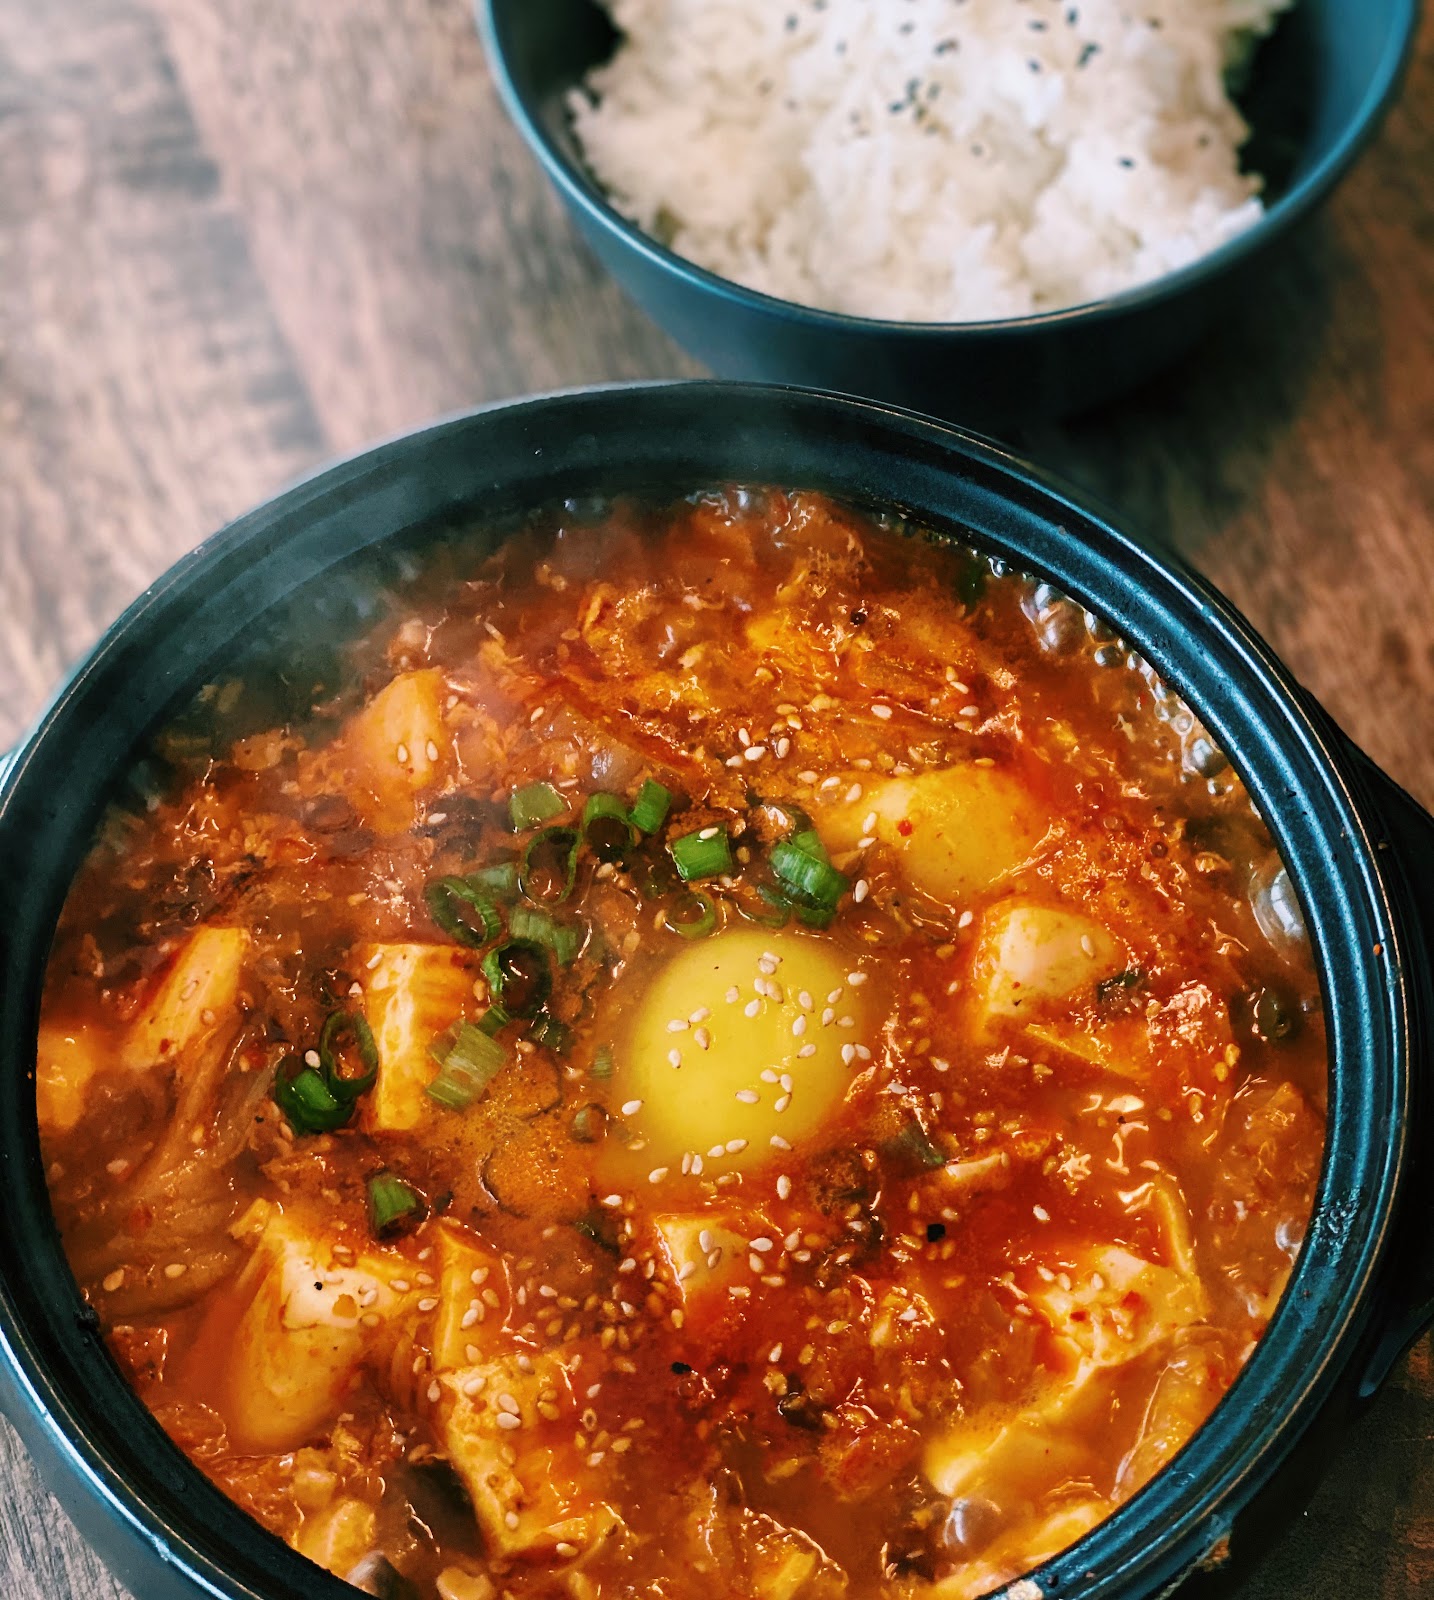 A bowl of hearty Kimchi Tofu Stew, rich in color with kimchi, tofu, and egg, garnished with green onions, ideal for a quick and healthy meal.